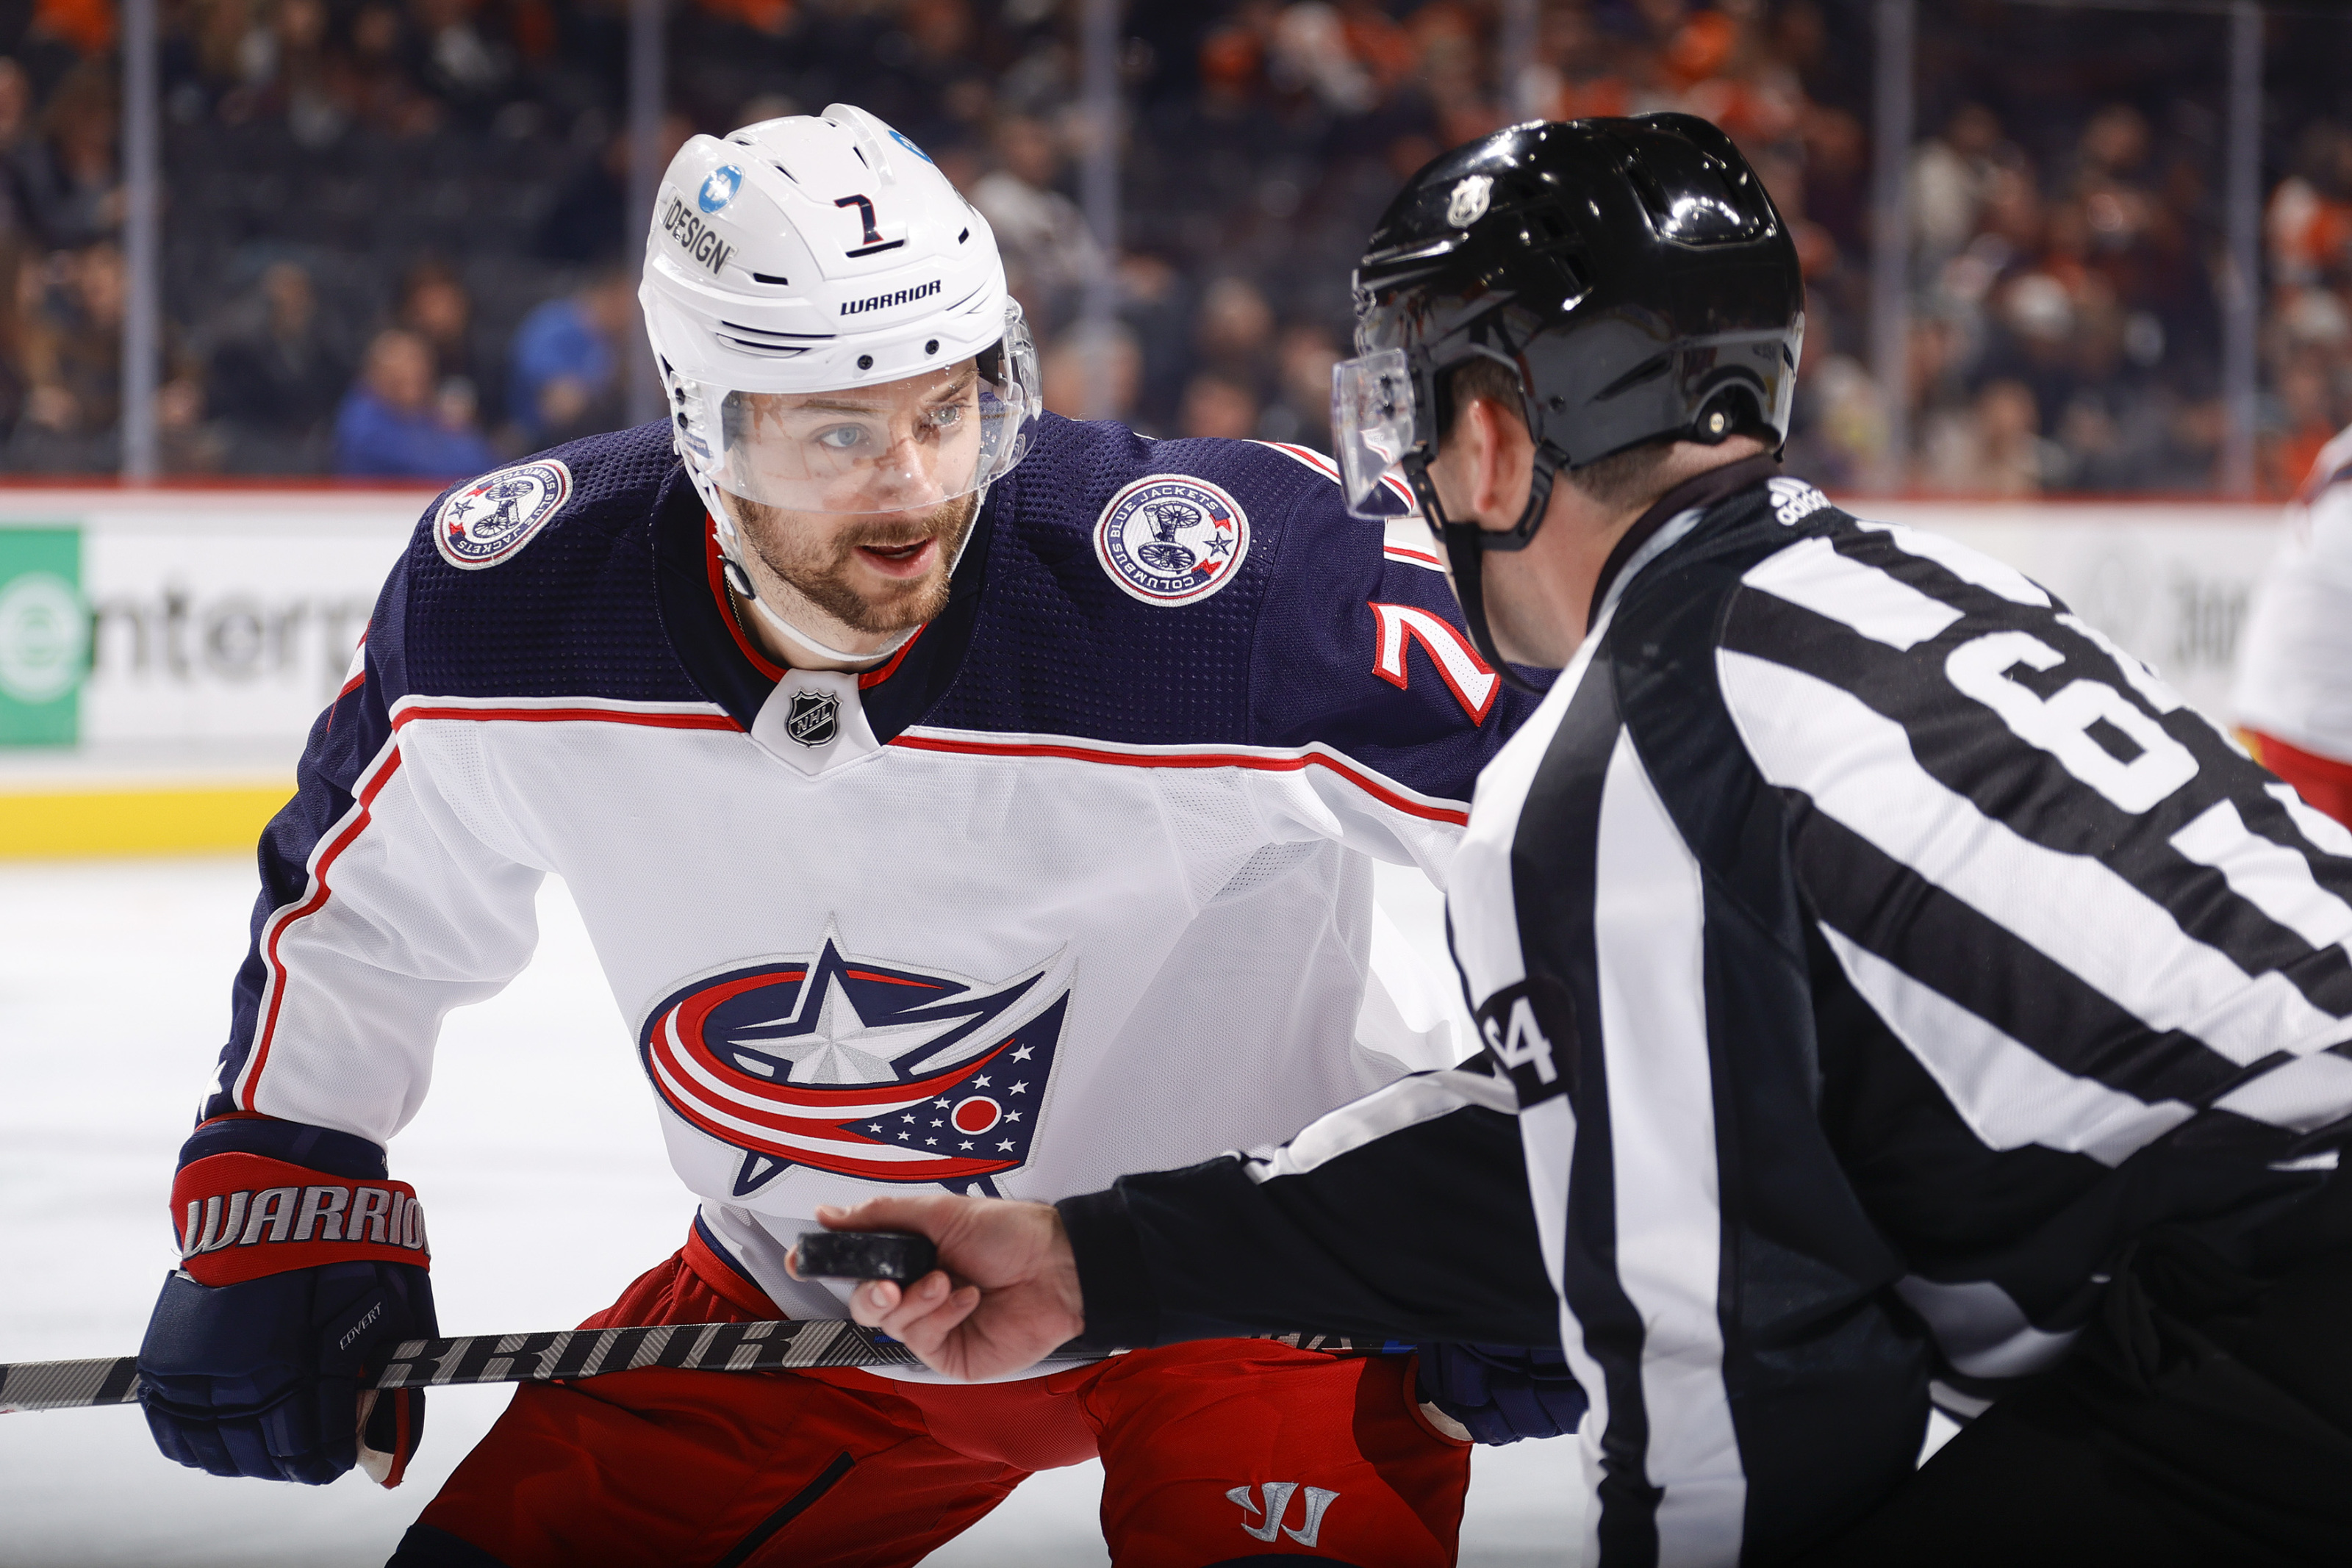 The perfect fit': Sean Kuraly at peace with the Blue Jackets